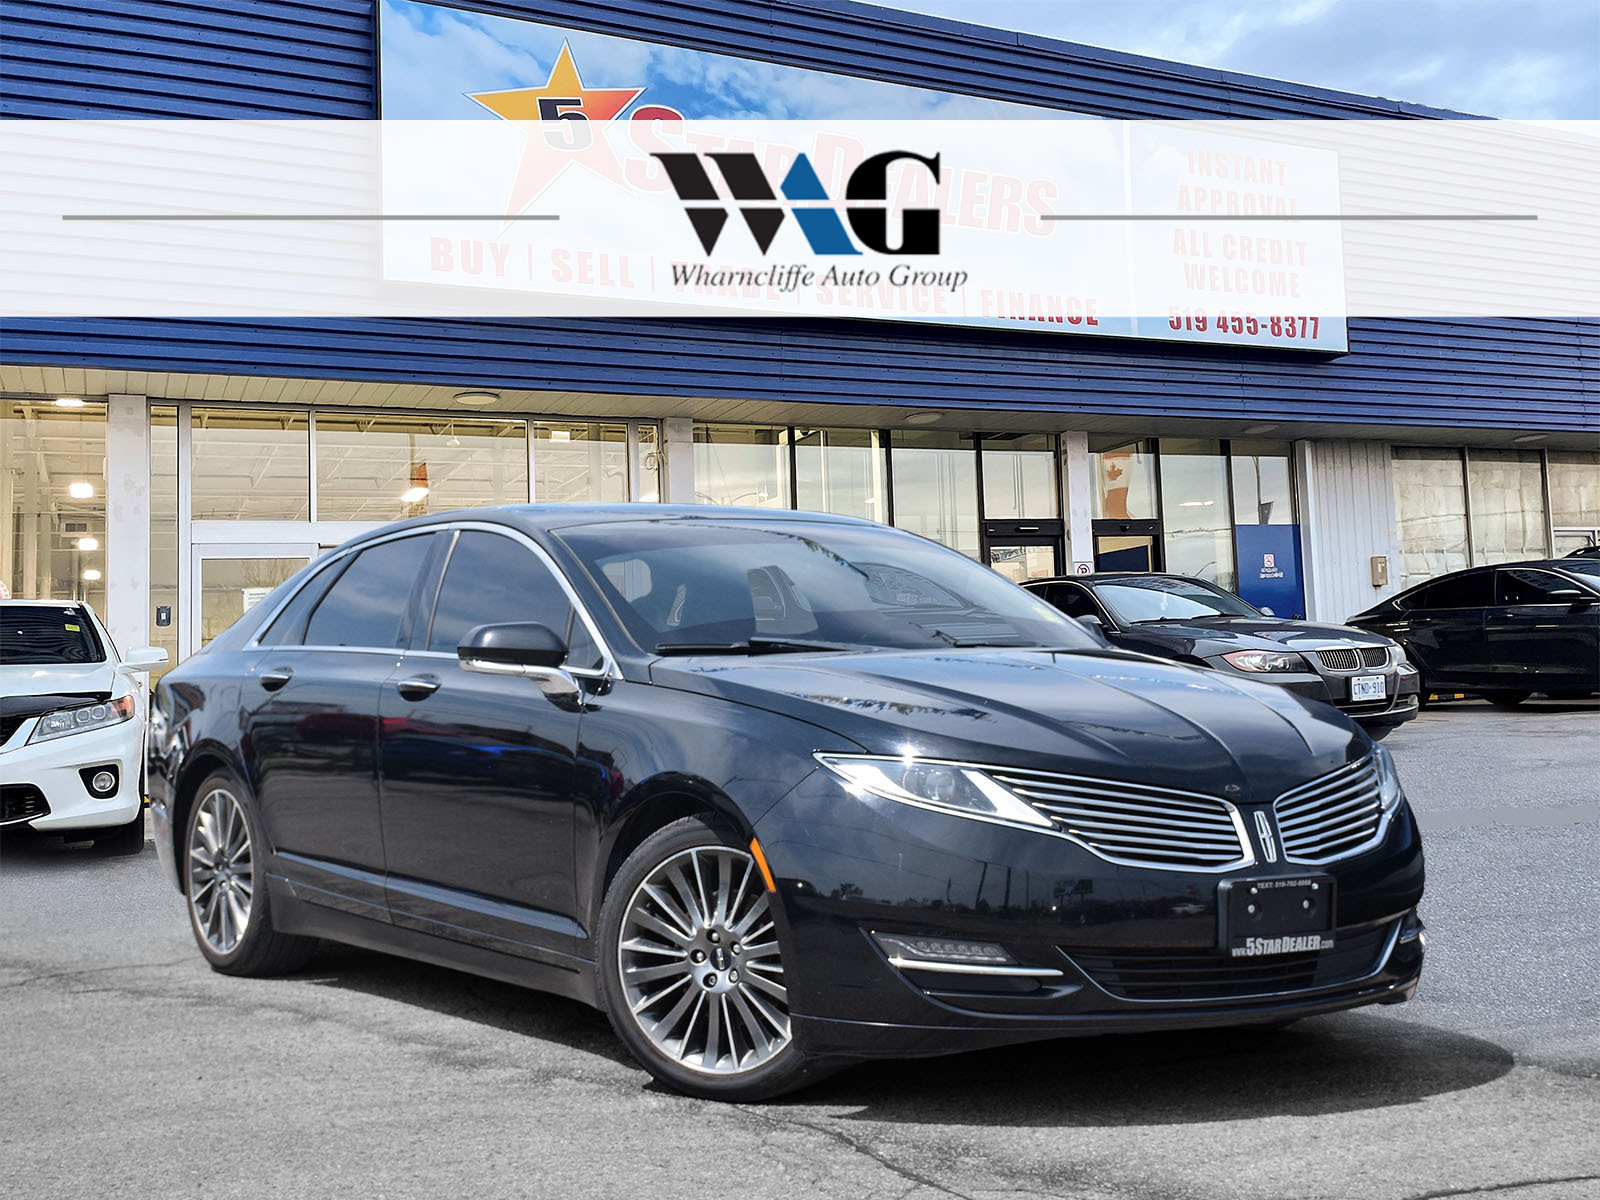 2016 Lincoln MKZ NAV LEATHER SUNROOF LOADED! WE FINANCE ALL CREDIT